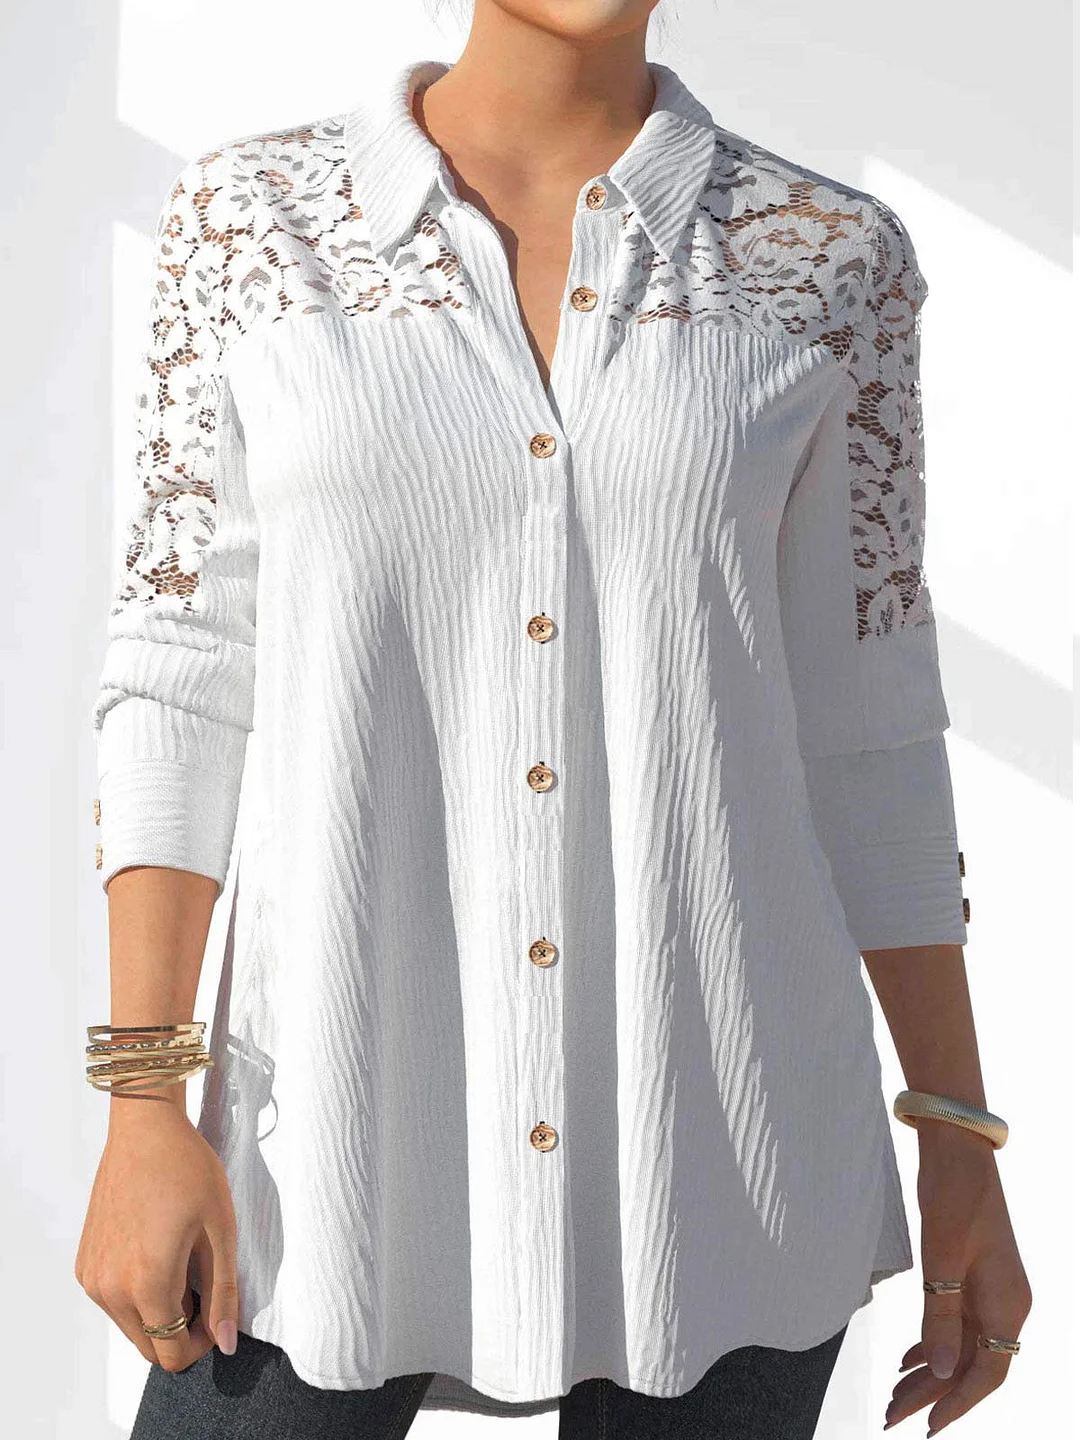 Women Long Sleeve V-neck Lace Floral Printed Top